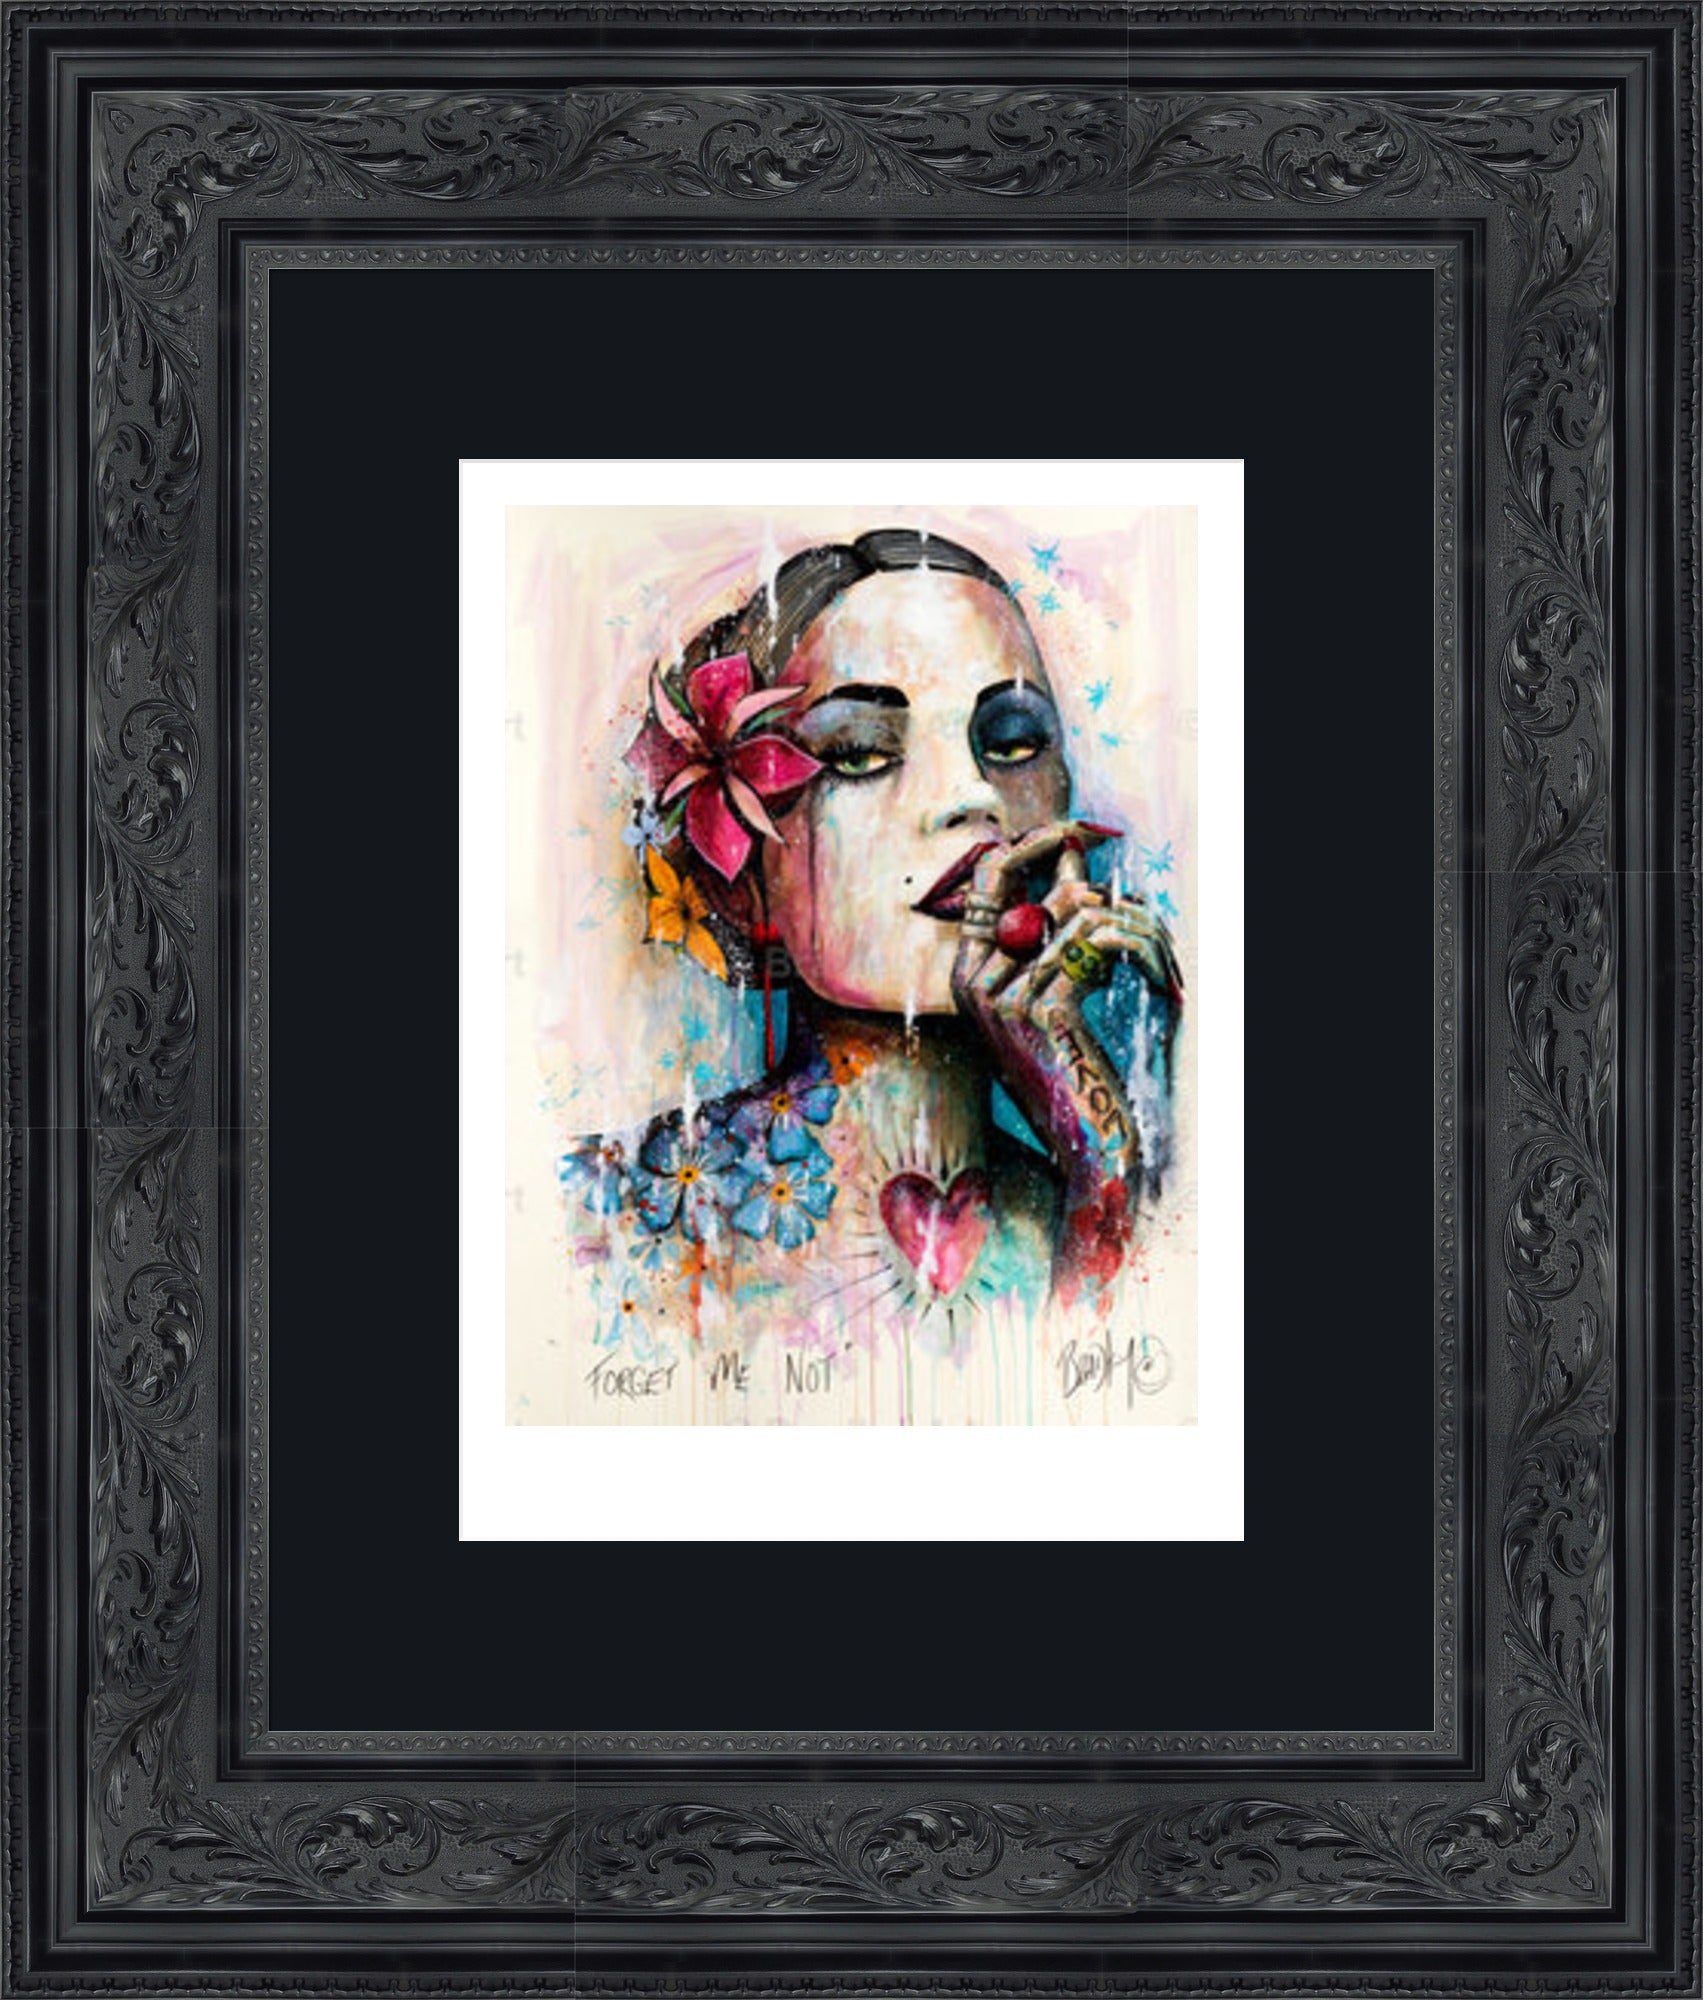 "Forget Me Not" Print